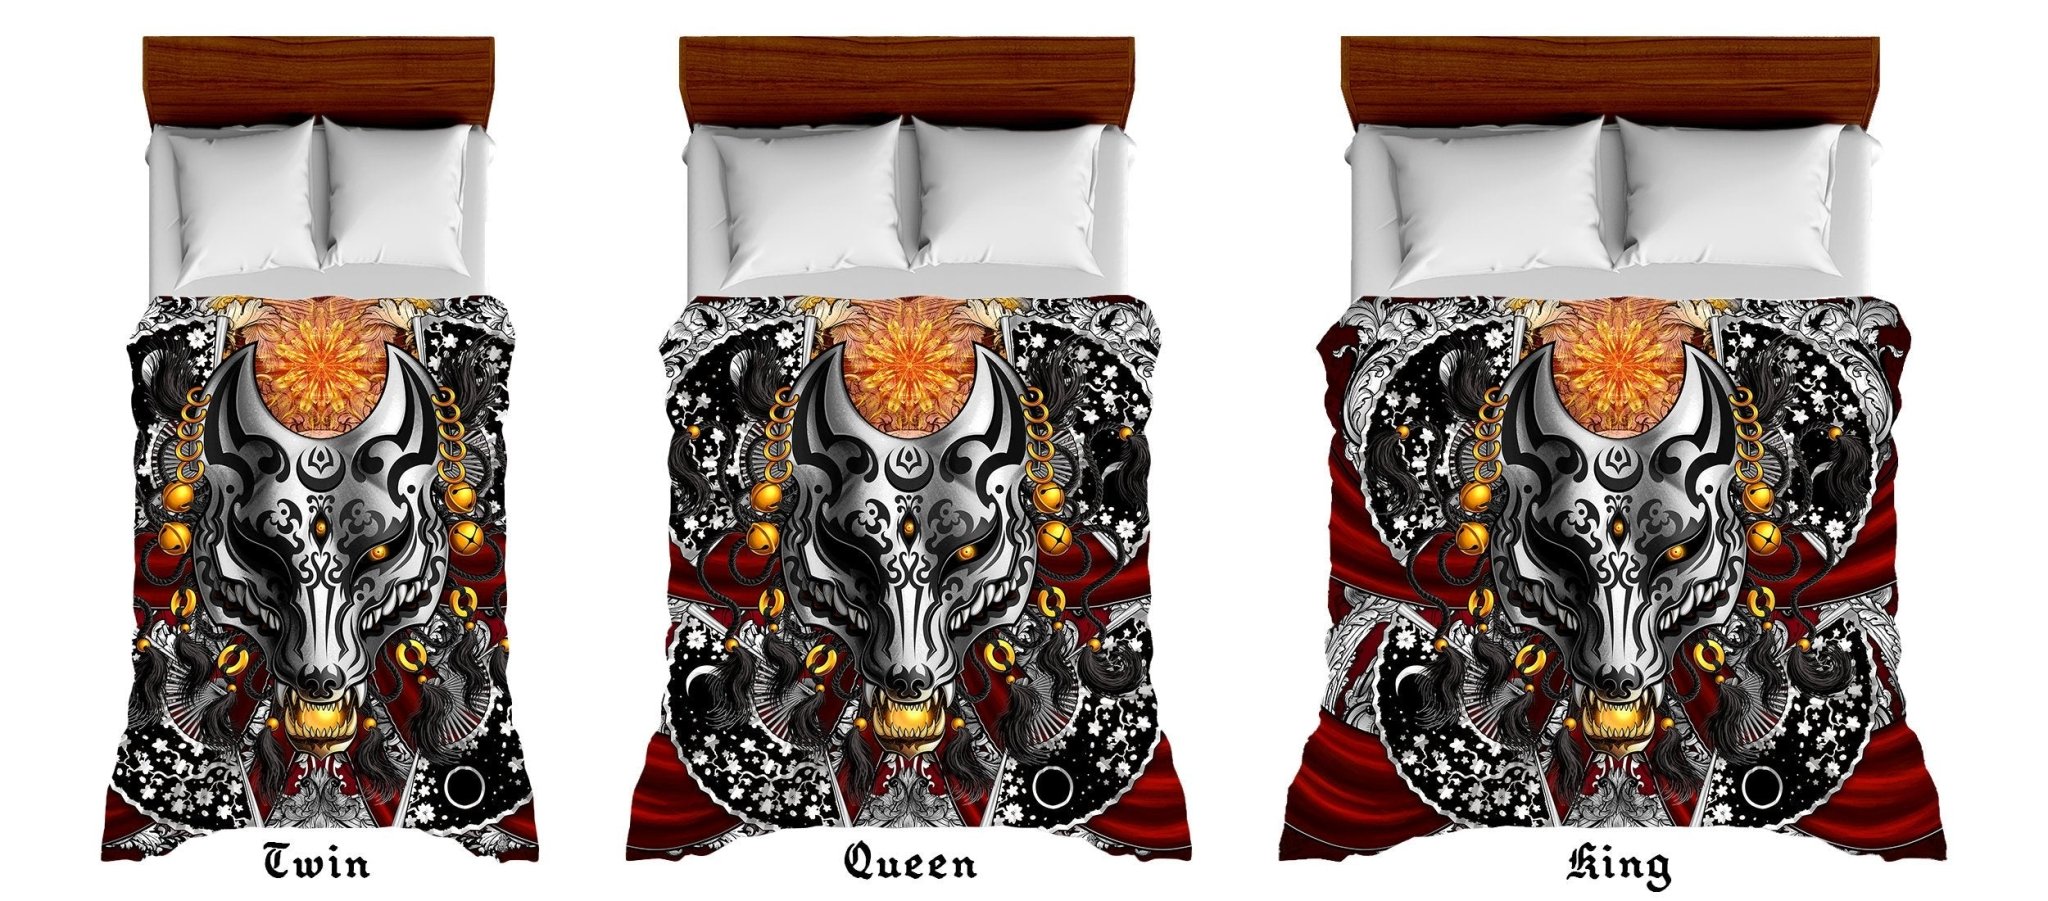 Kitsune Mask Bedding Set, Comforter and Duvet, Fox Okami and Anime Bed Cover and Bedroom Decor, King, Queen and Twin Size - Silver - Abysm Internal